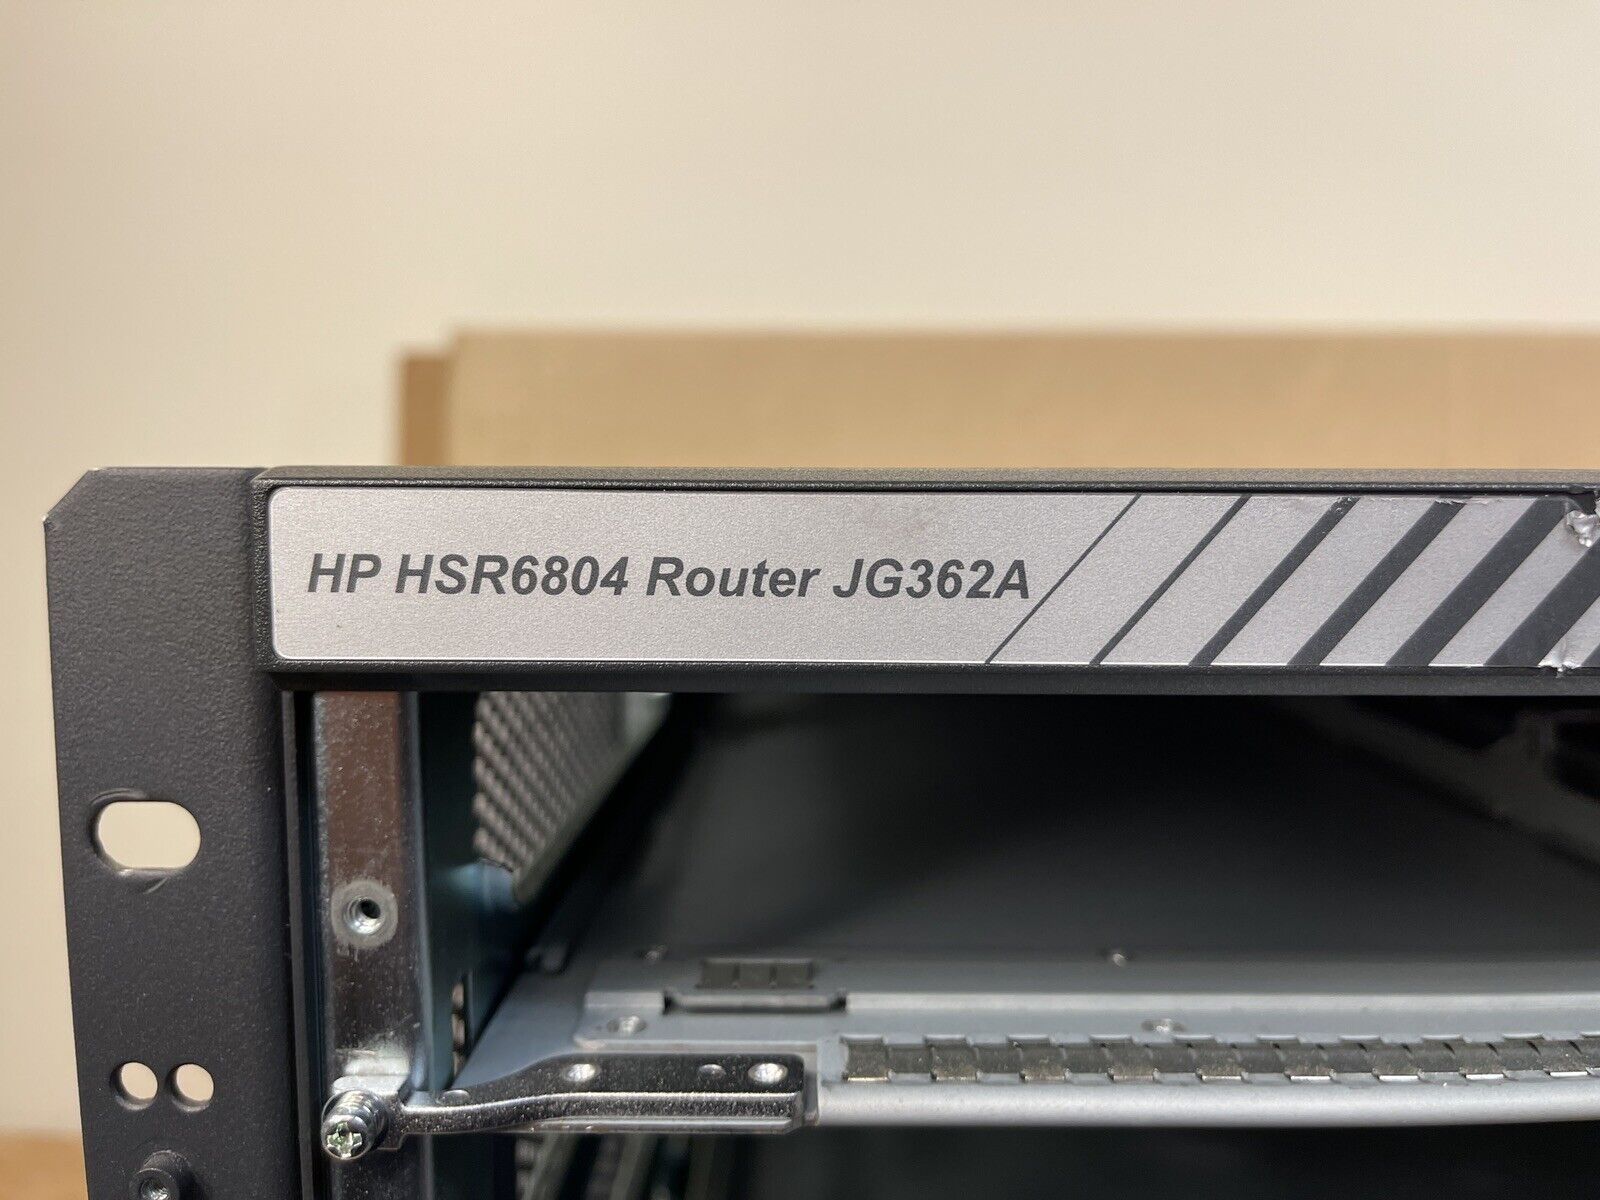 HP JG362A FlexNetwork HSR6804 RSE-X2 Router Chassis JG362A with 2x AC 1200W PSU JG335A.